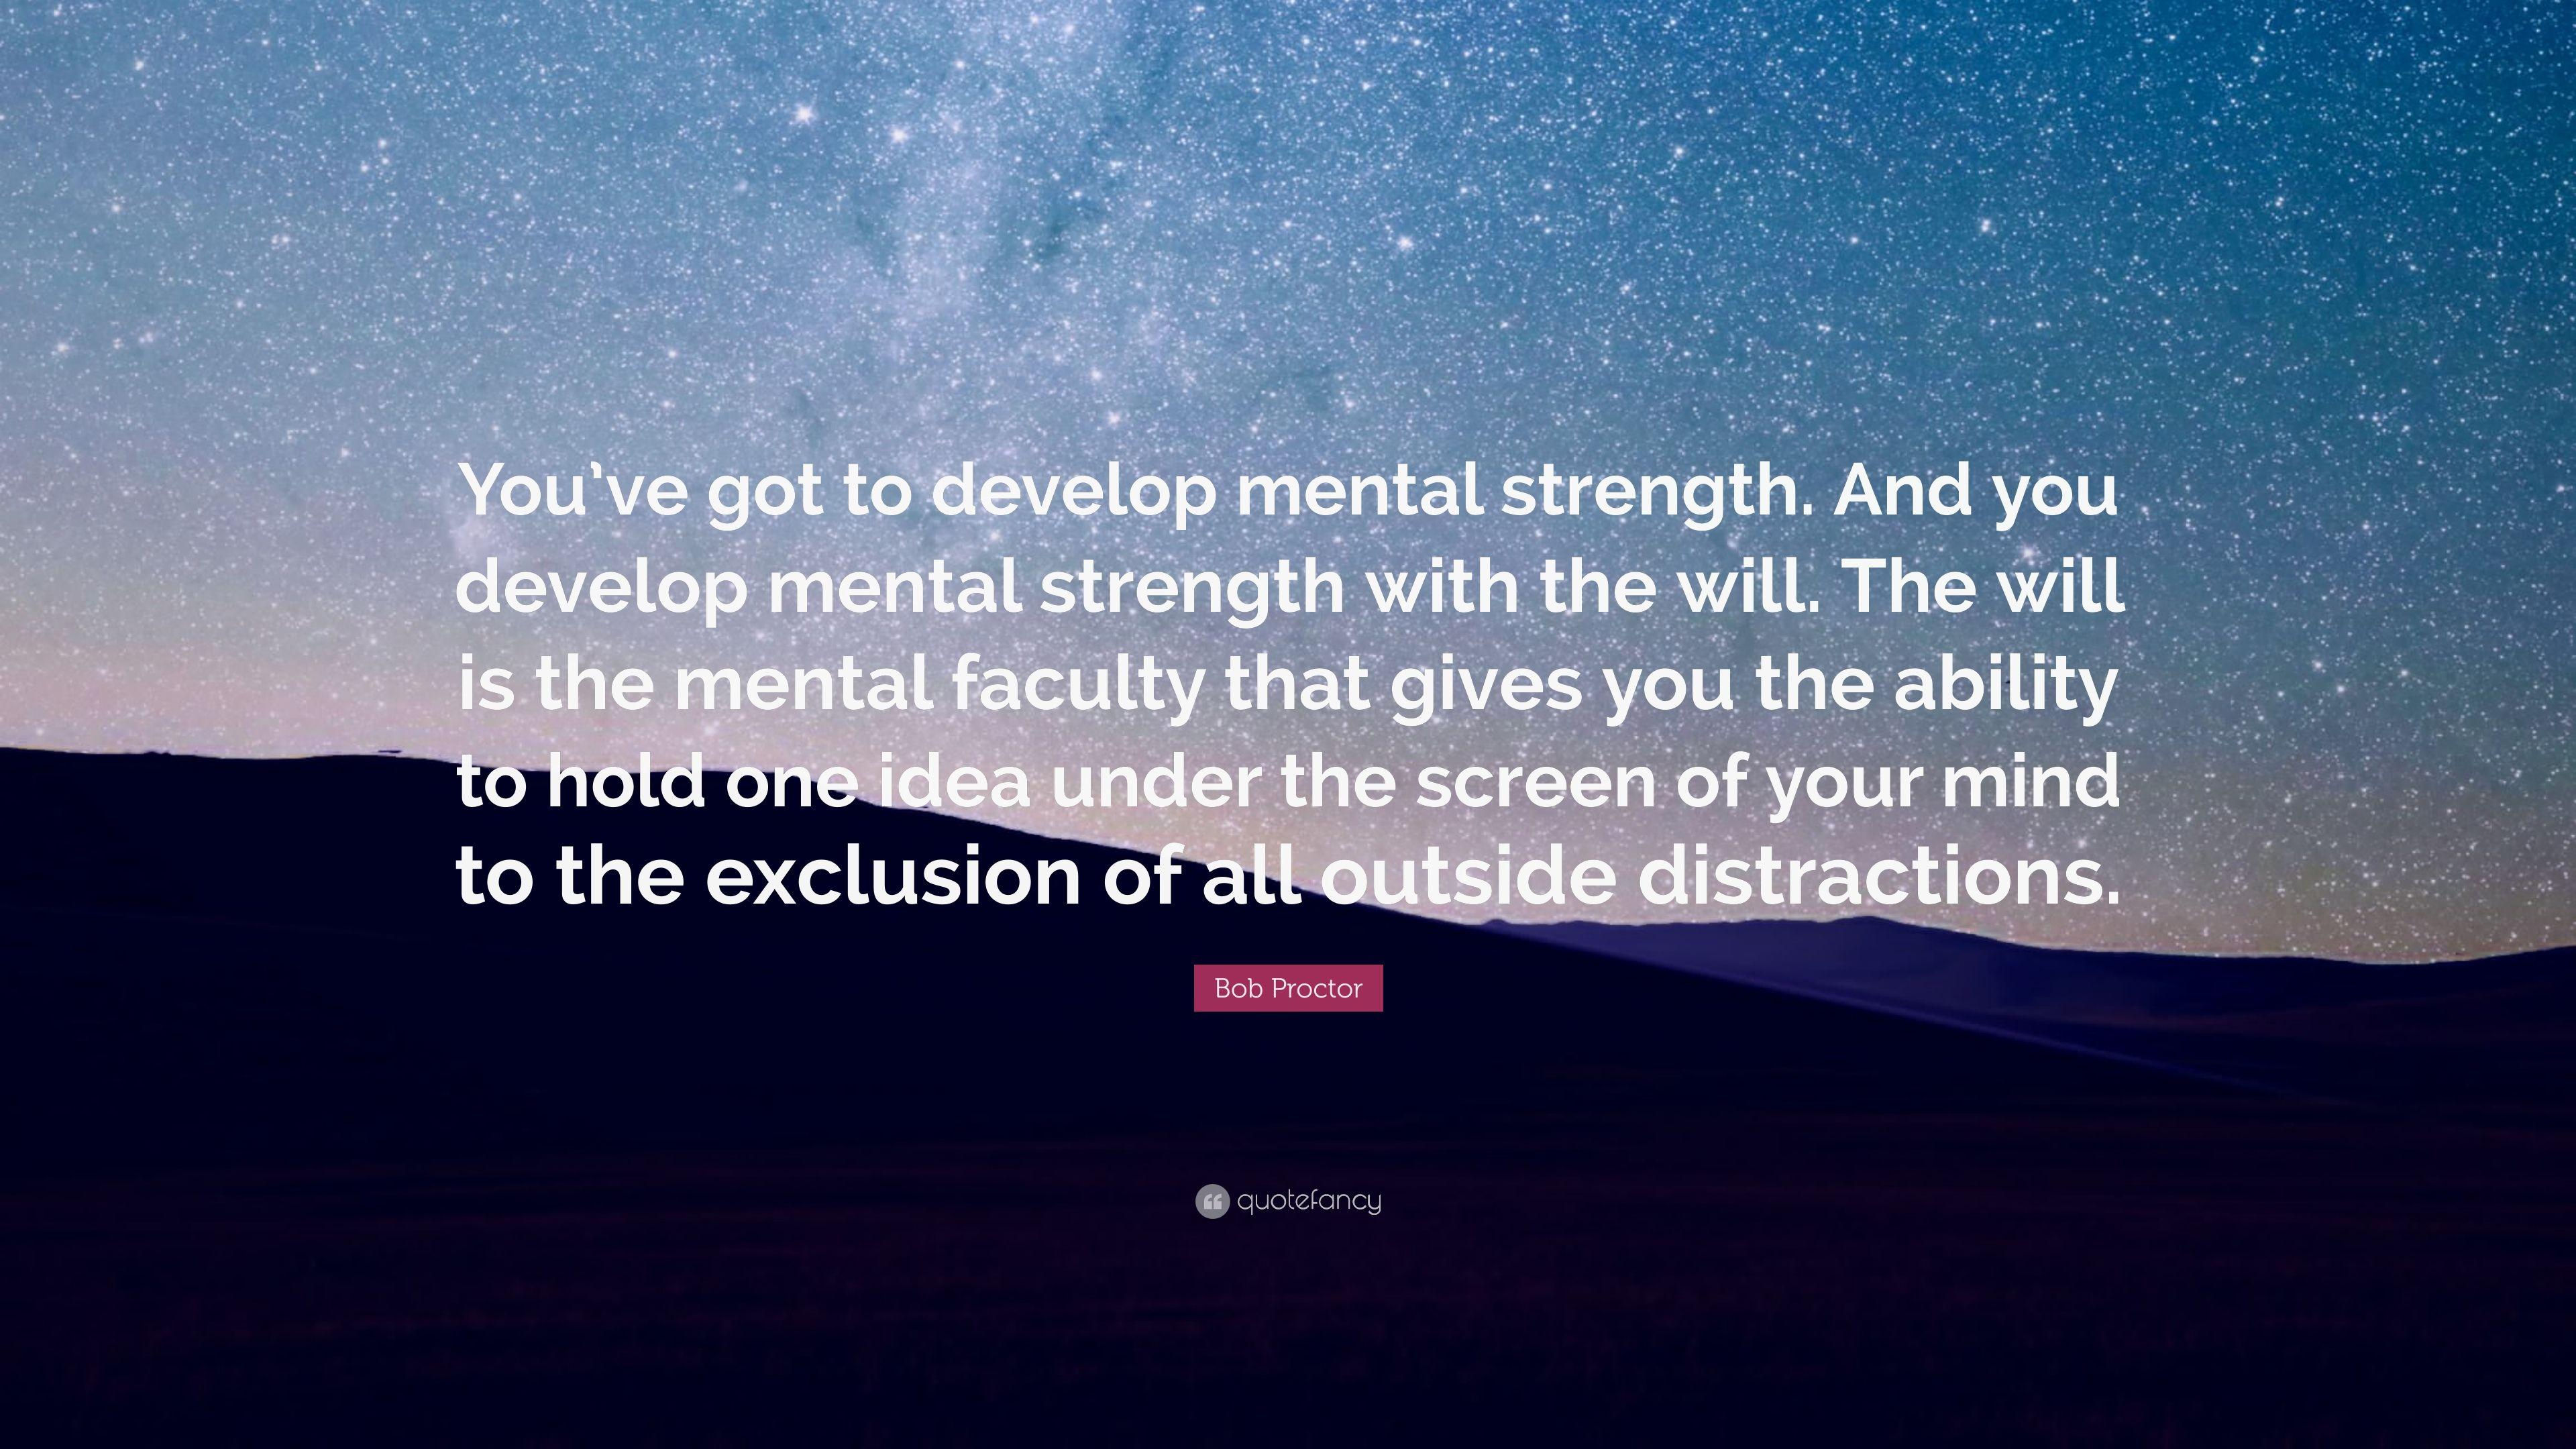 Bob Proctor Quote: “You've got to develop mental strength. And you